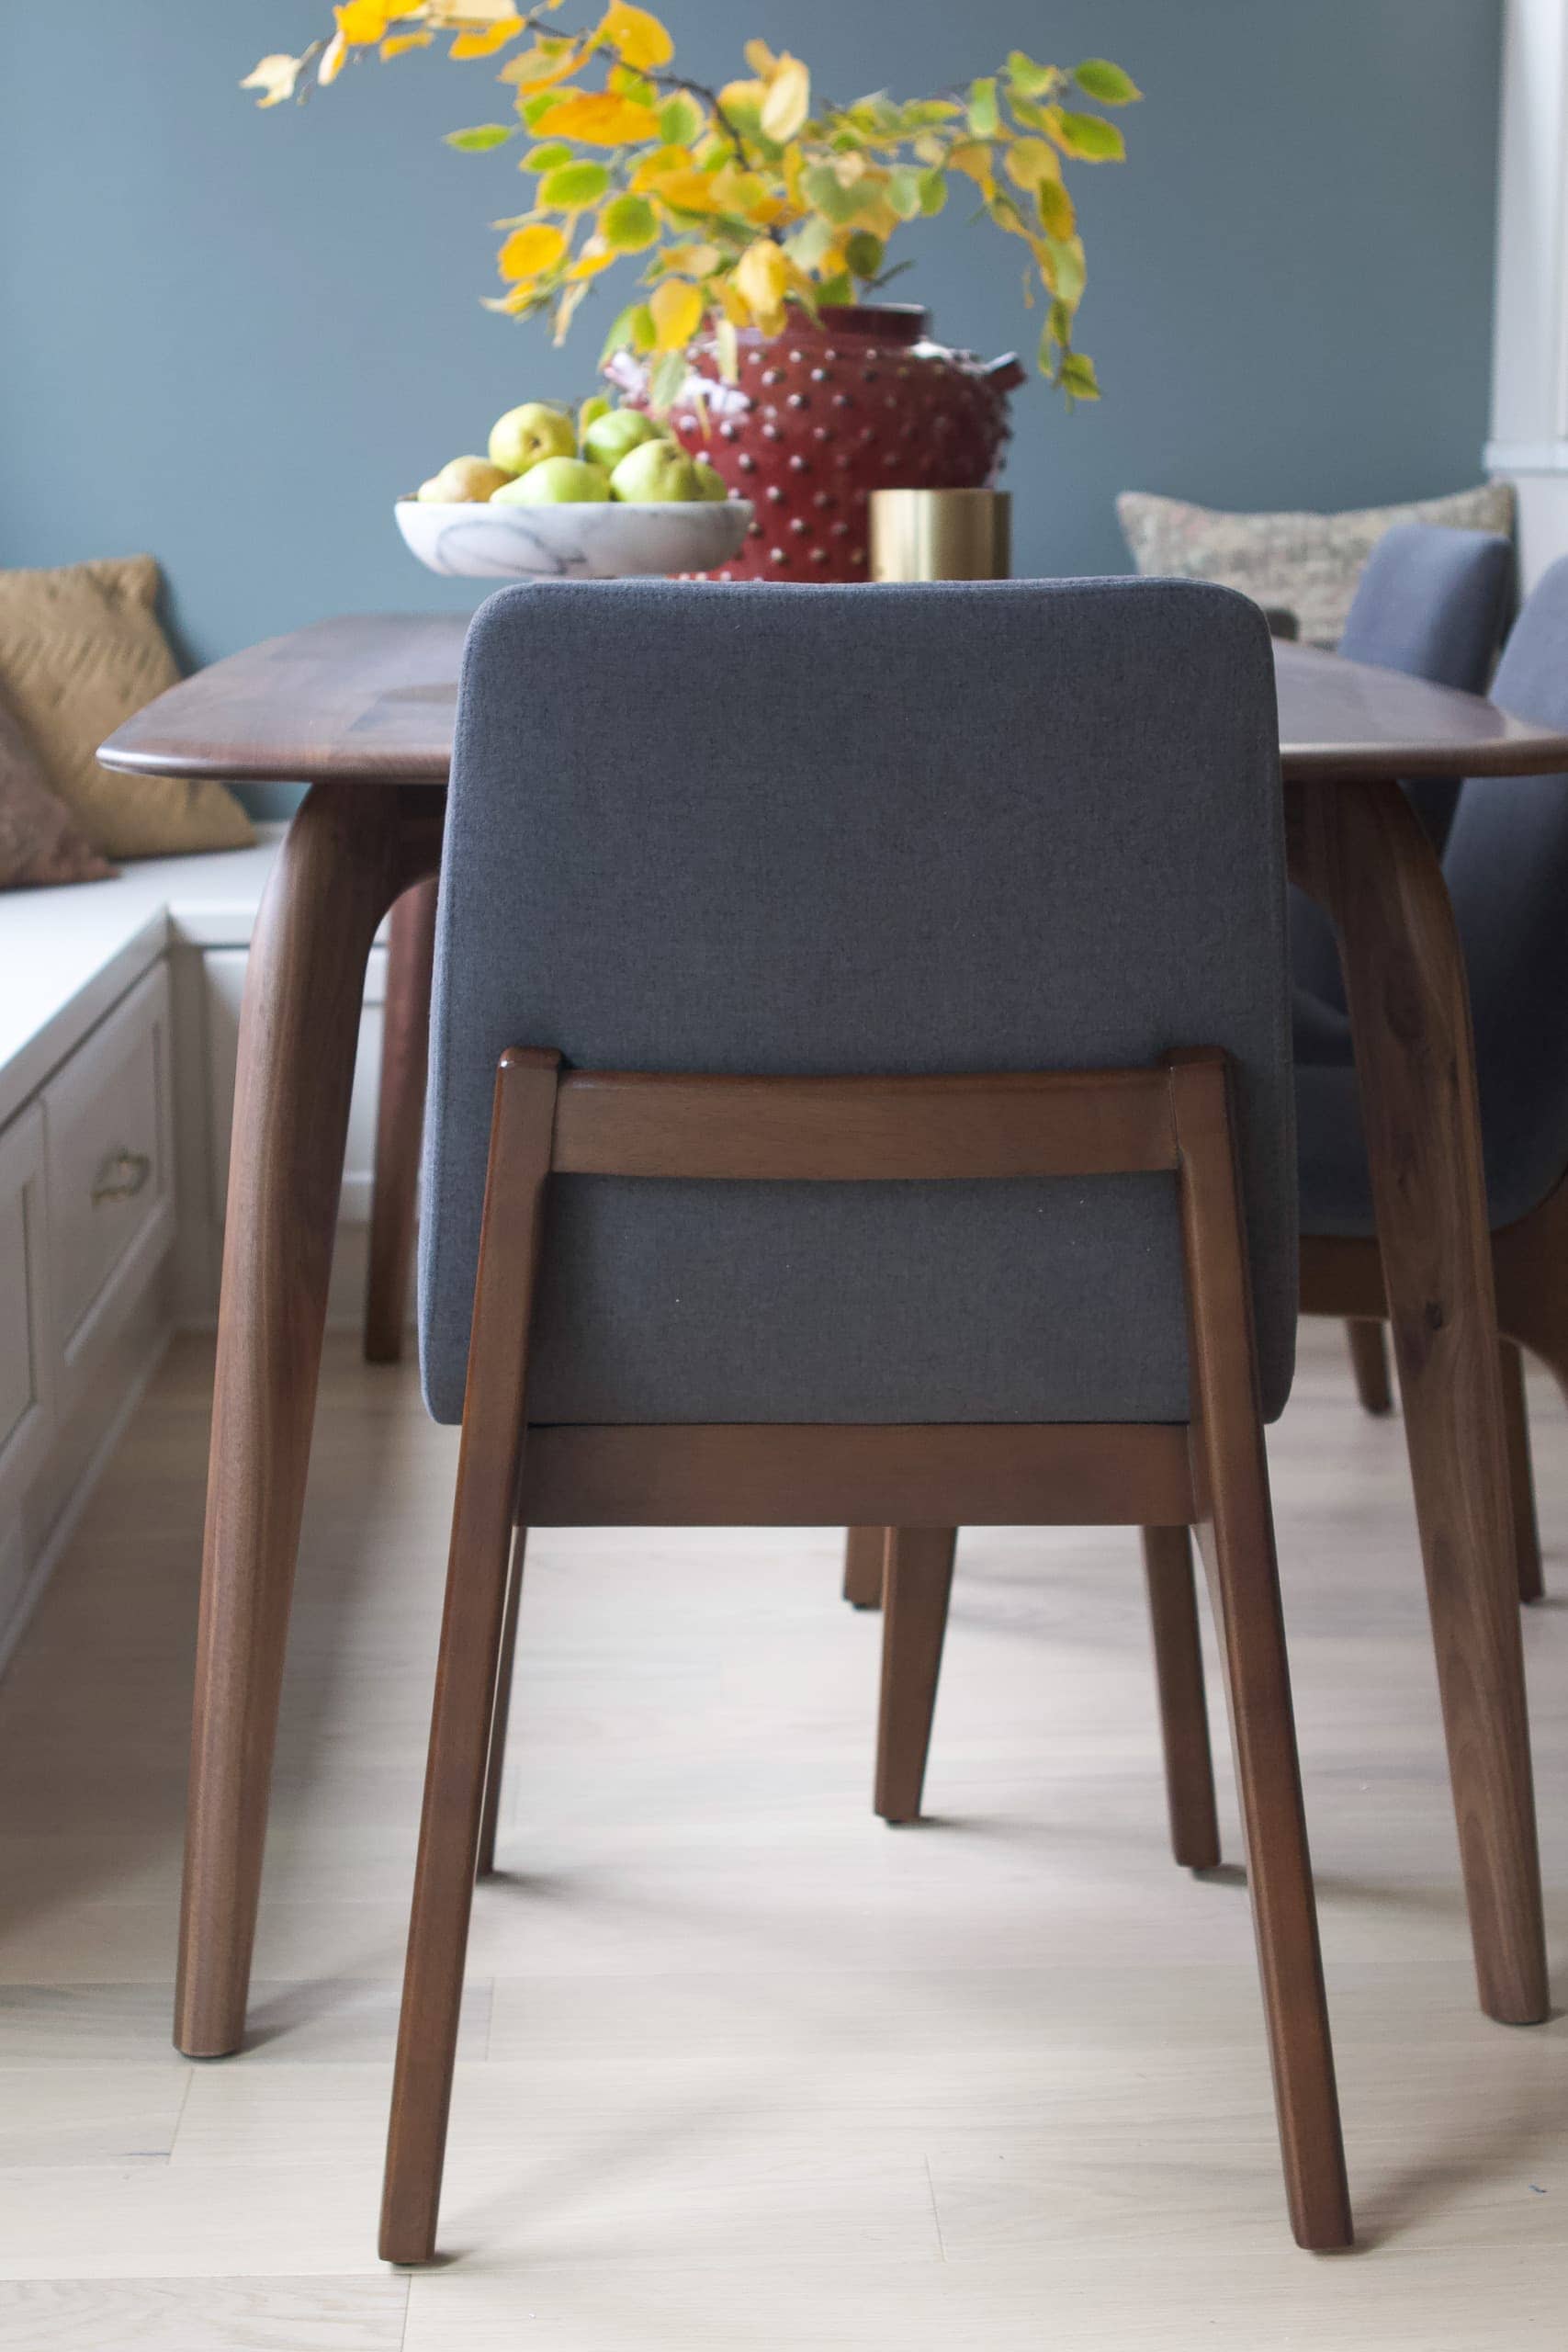 Carrie dining chair from Castlery